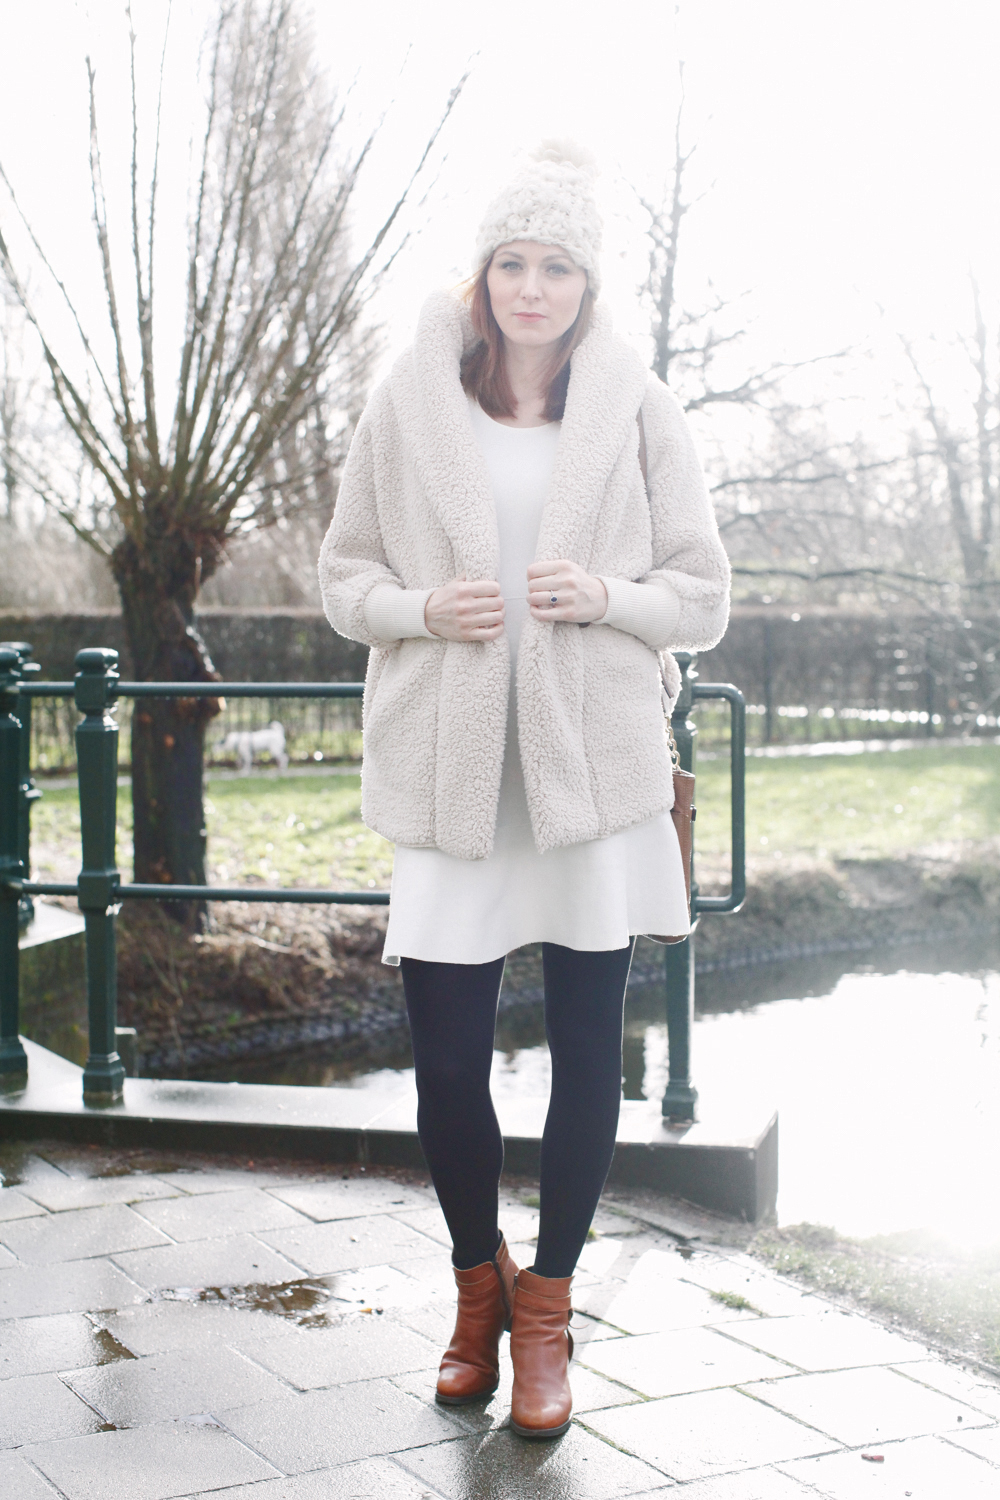 Winter maternity outfit in white